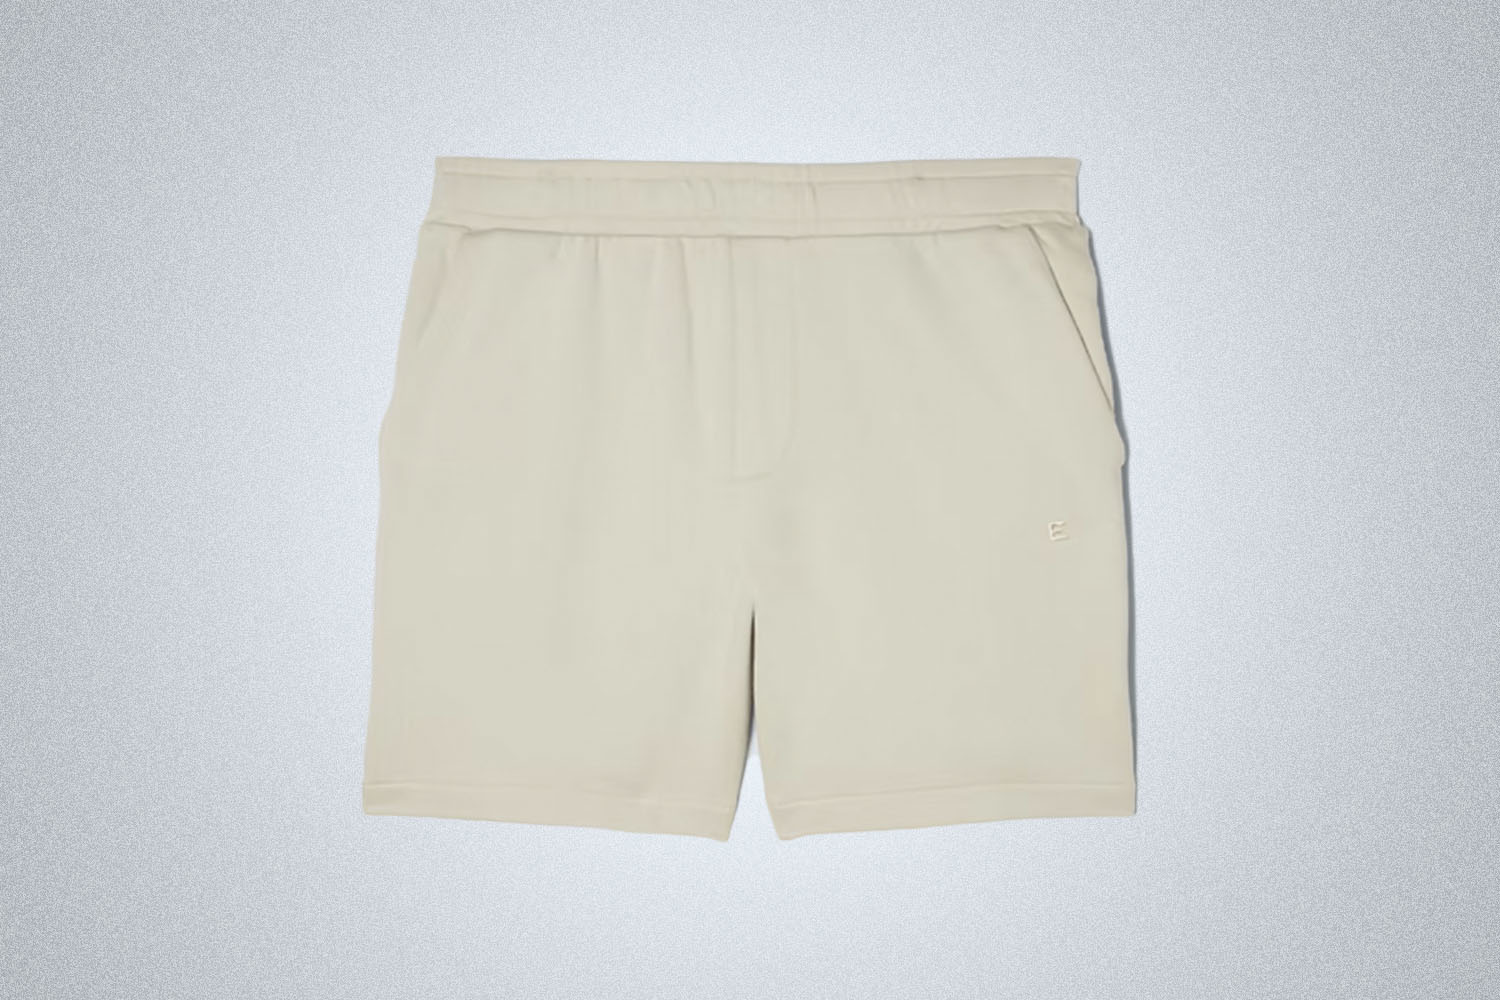 a pair of beige track shorts from Everlane on a grey background